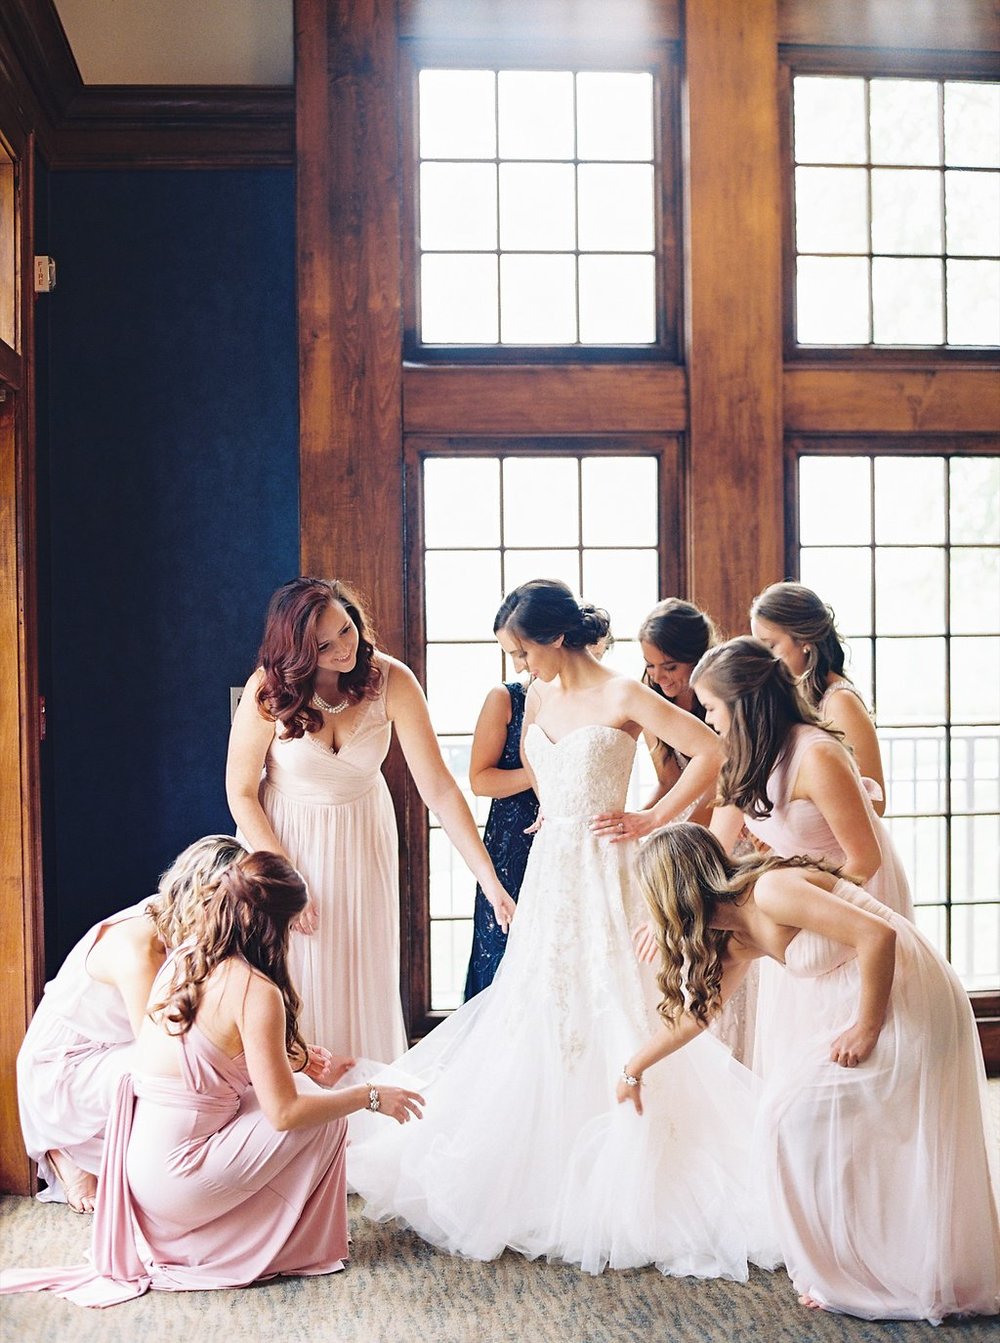 Our Southern Wedding Getting Ready With My Bridal Party